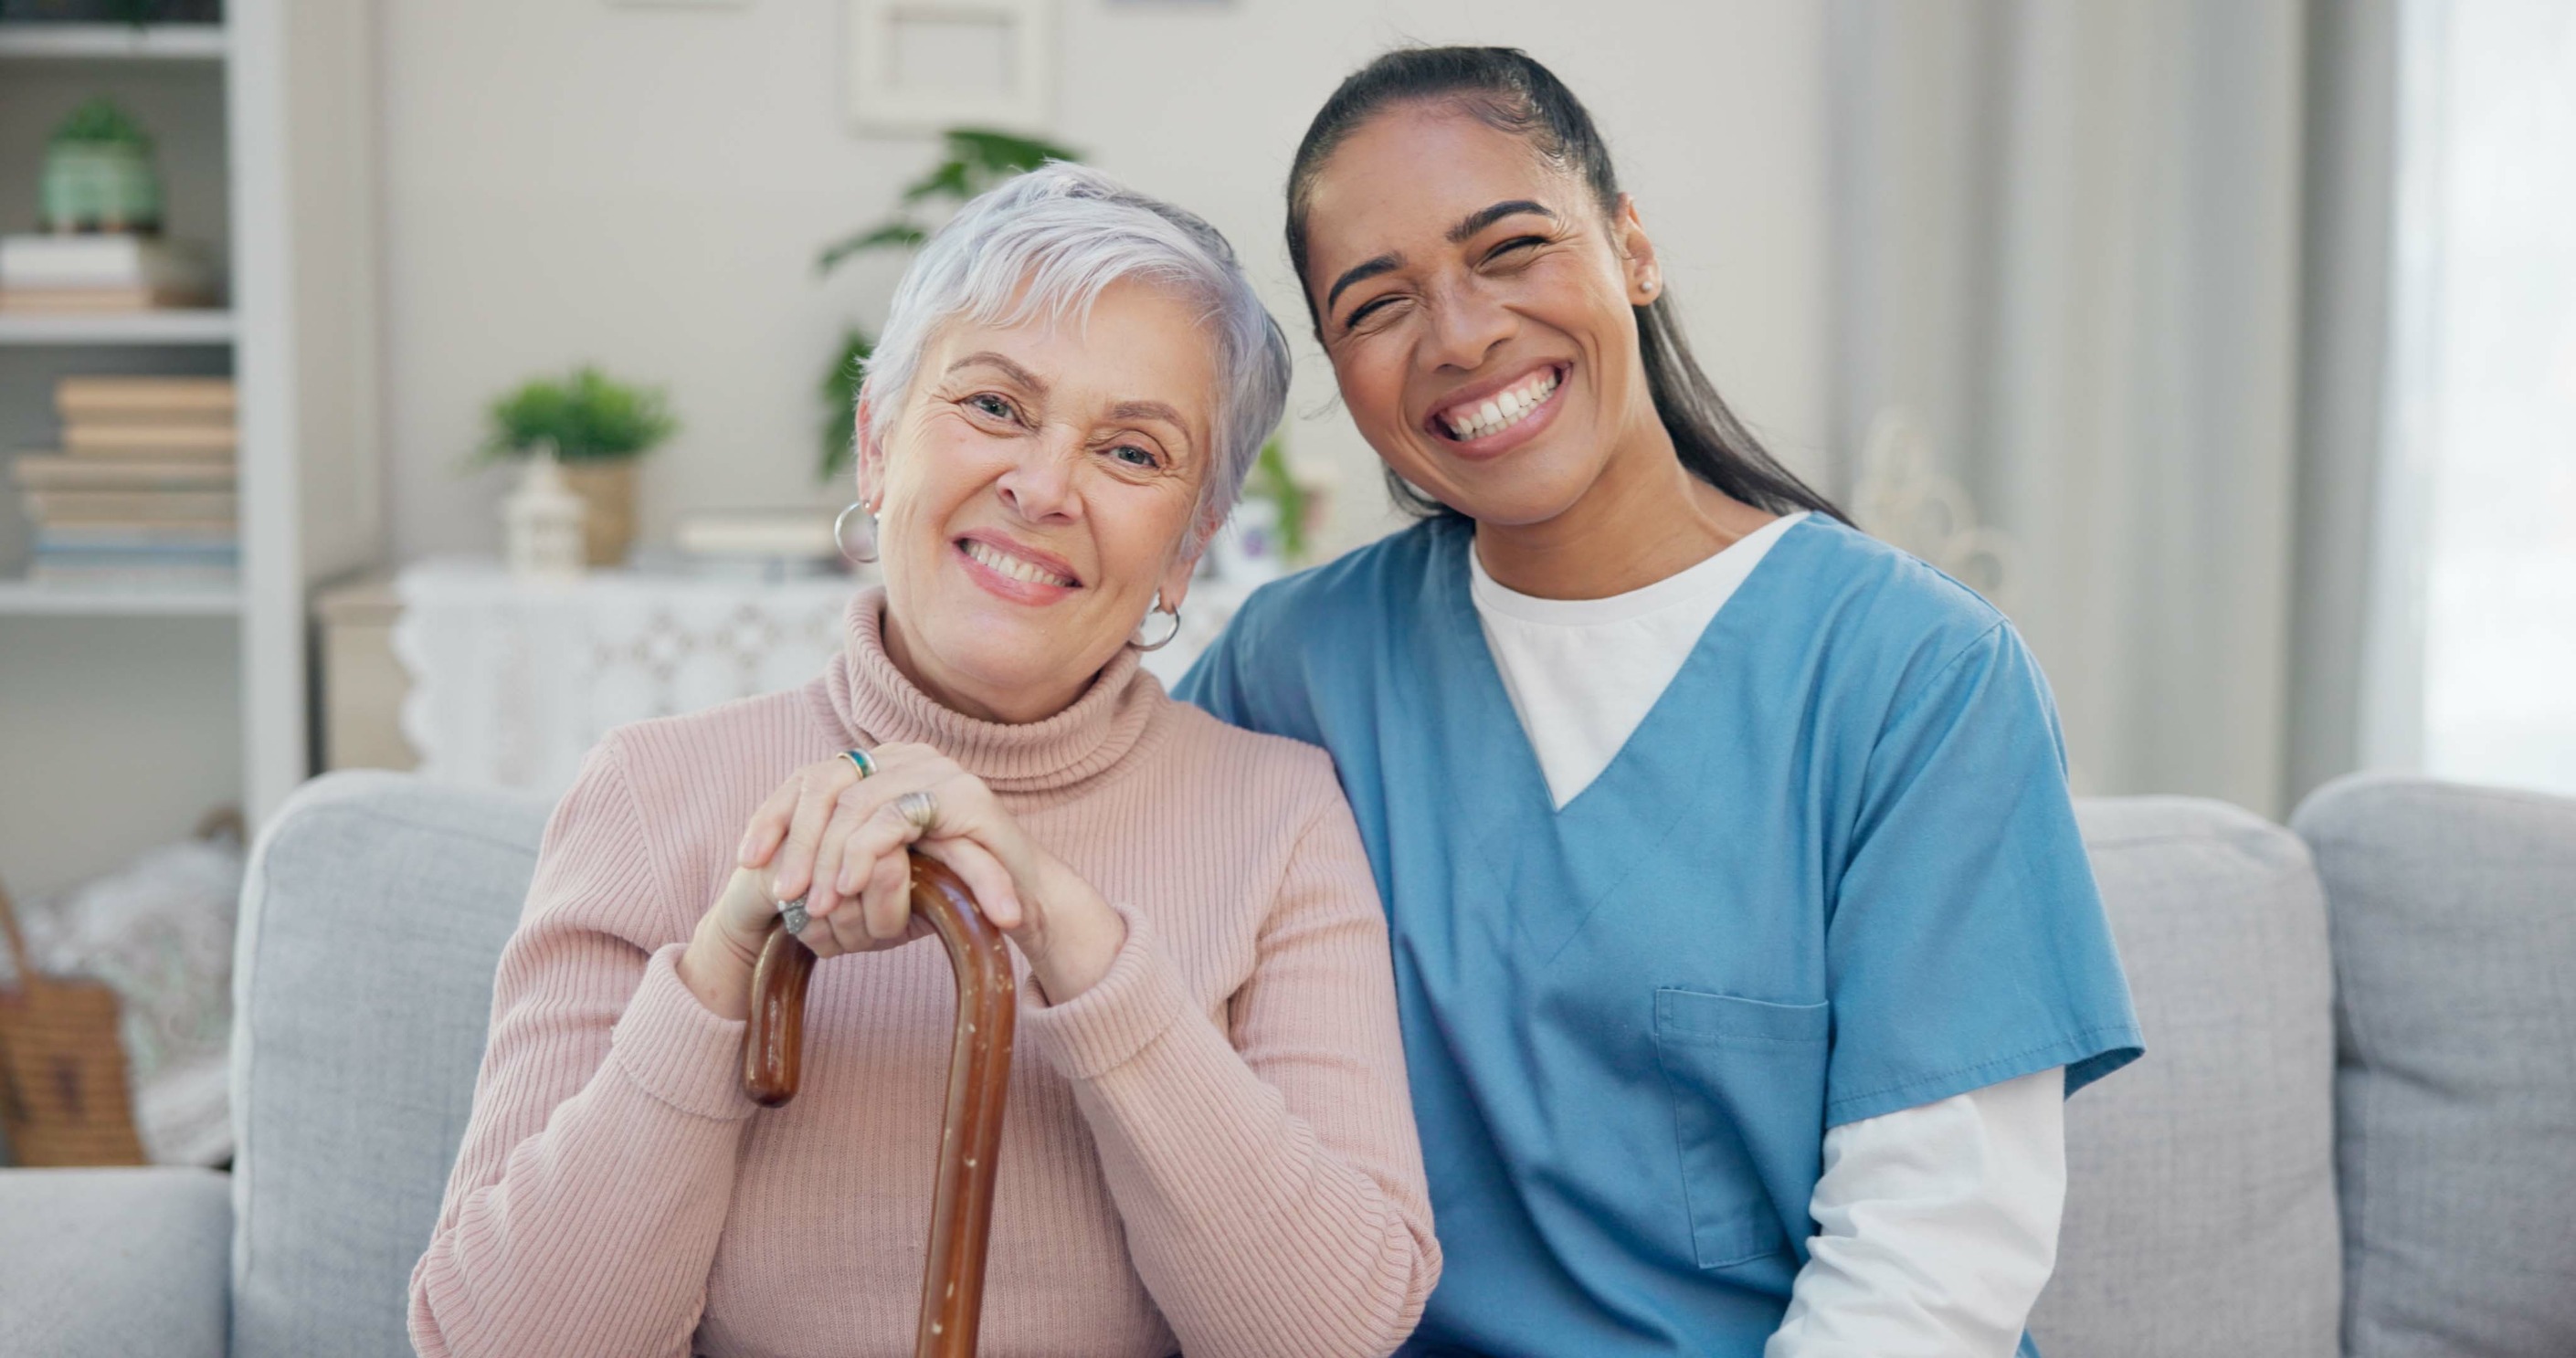 Is Caregiver the Right Job for You?